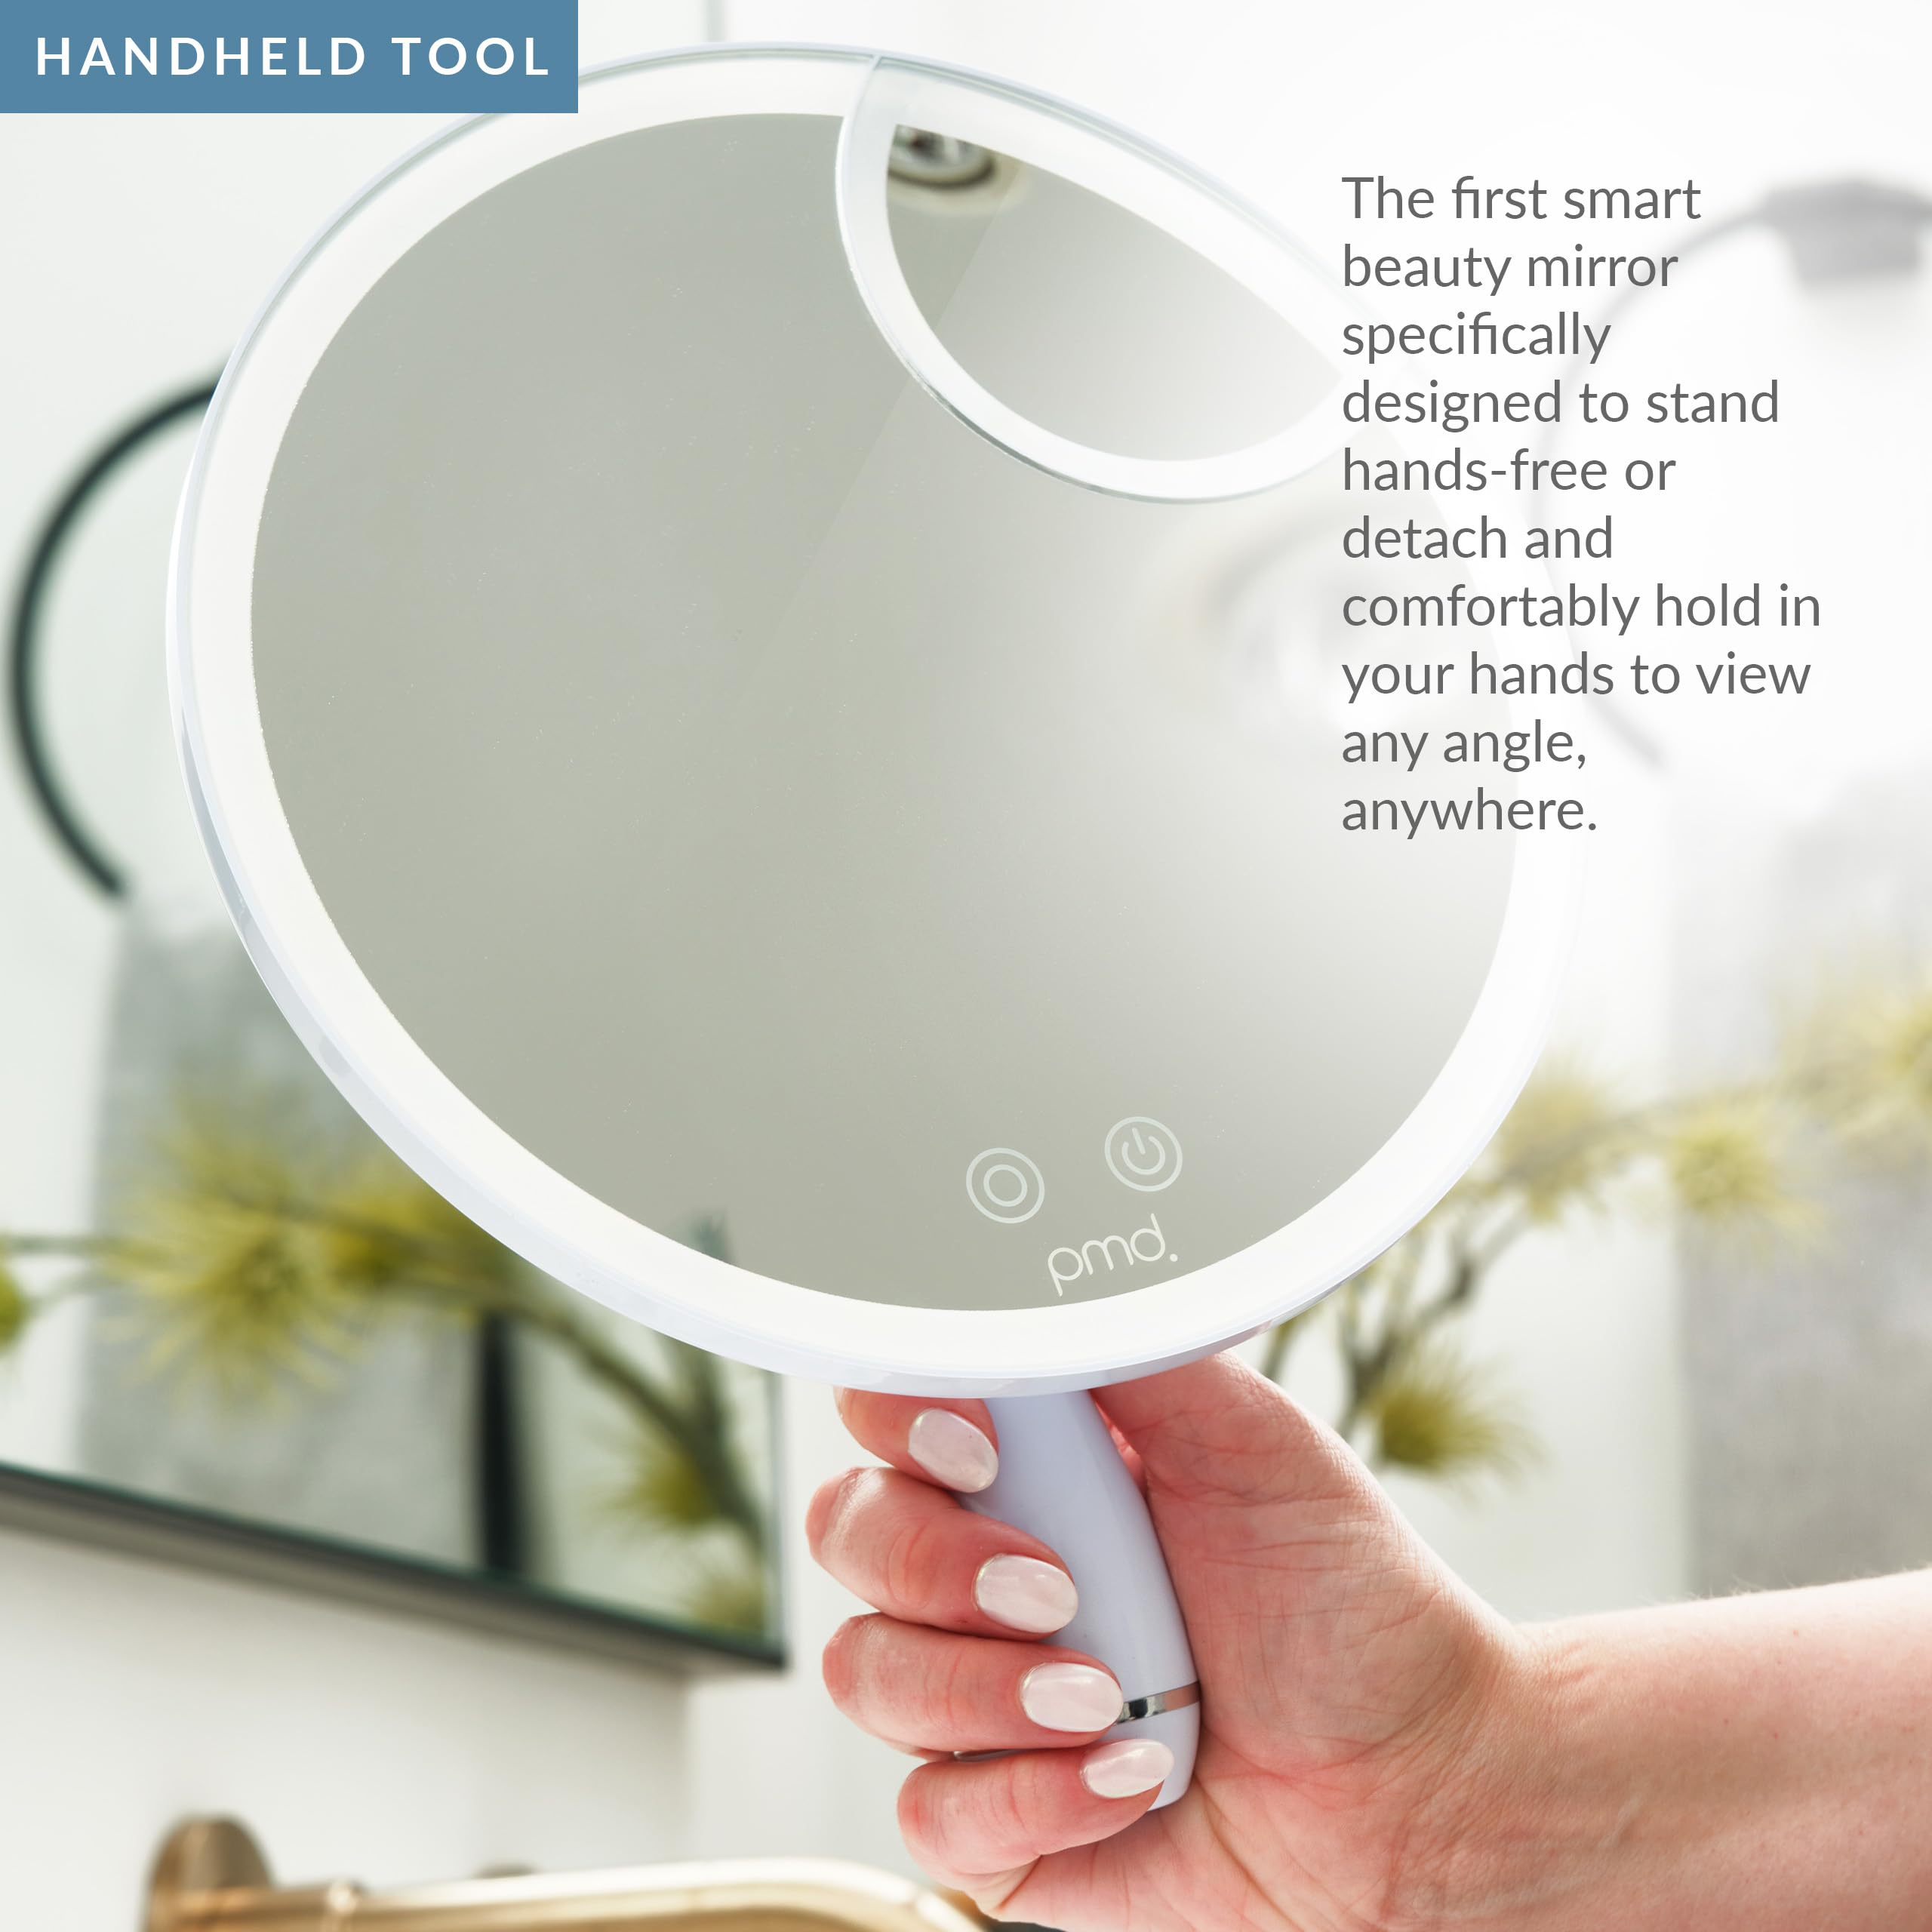 PMD Reflect Pro - Premium Beauty LED Mirror with TriLume Technology & Handheld Capabilities - Three Light Modes - 360° Rotation, 90° Tilt, & 5x Magnification - Travel Ready